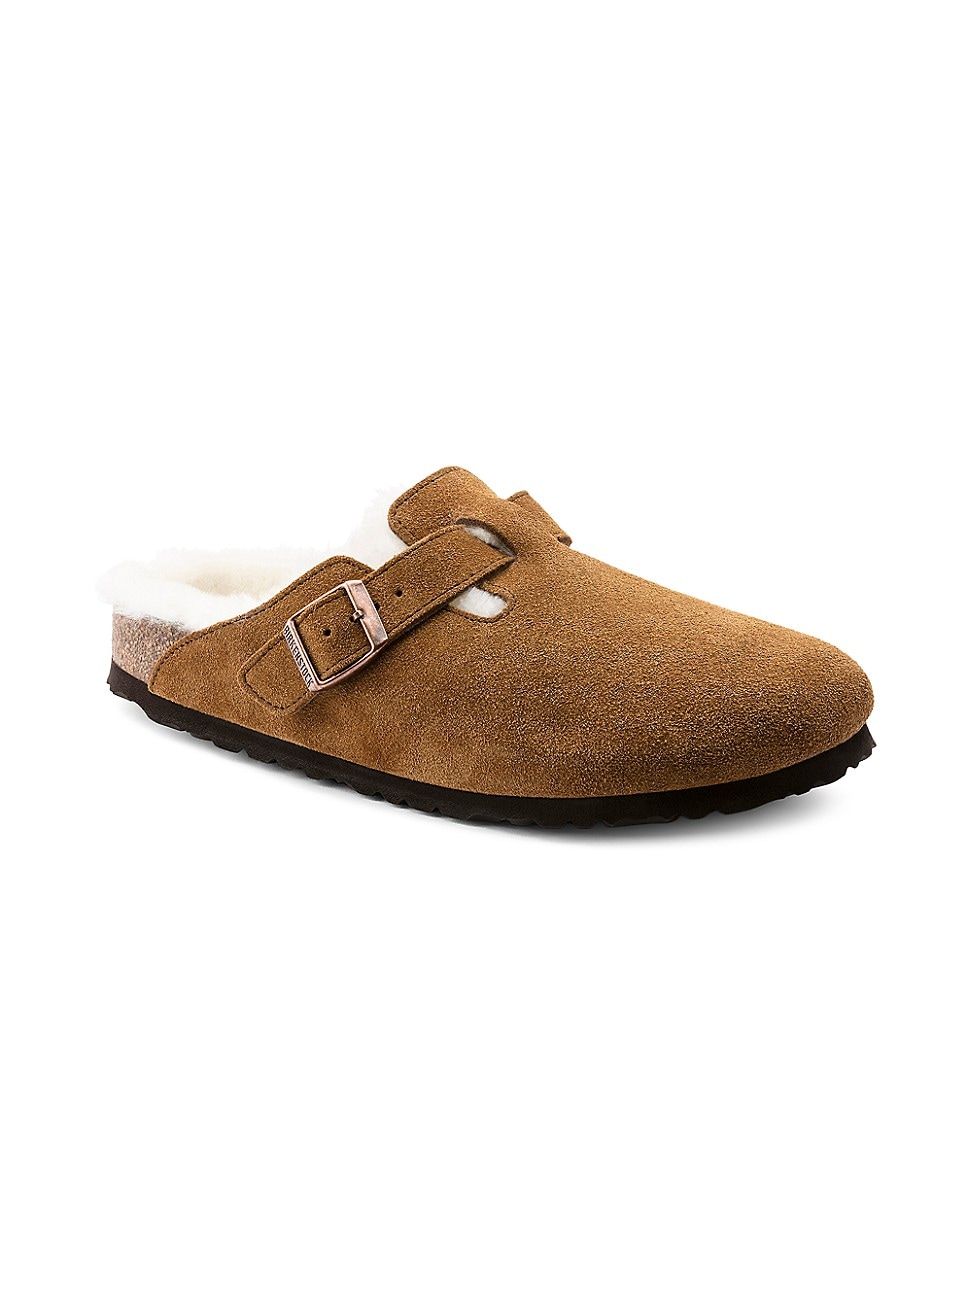 Men's Boston Shearling-Lined Clogs - Mink Natural - Size 13 | Saks Fifth Avenue